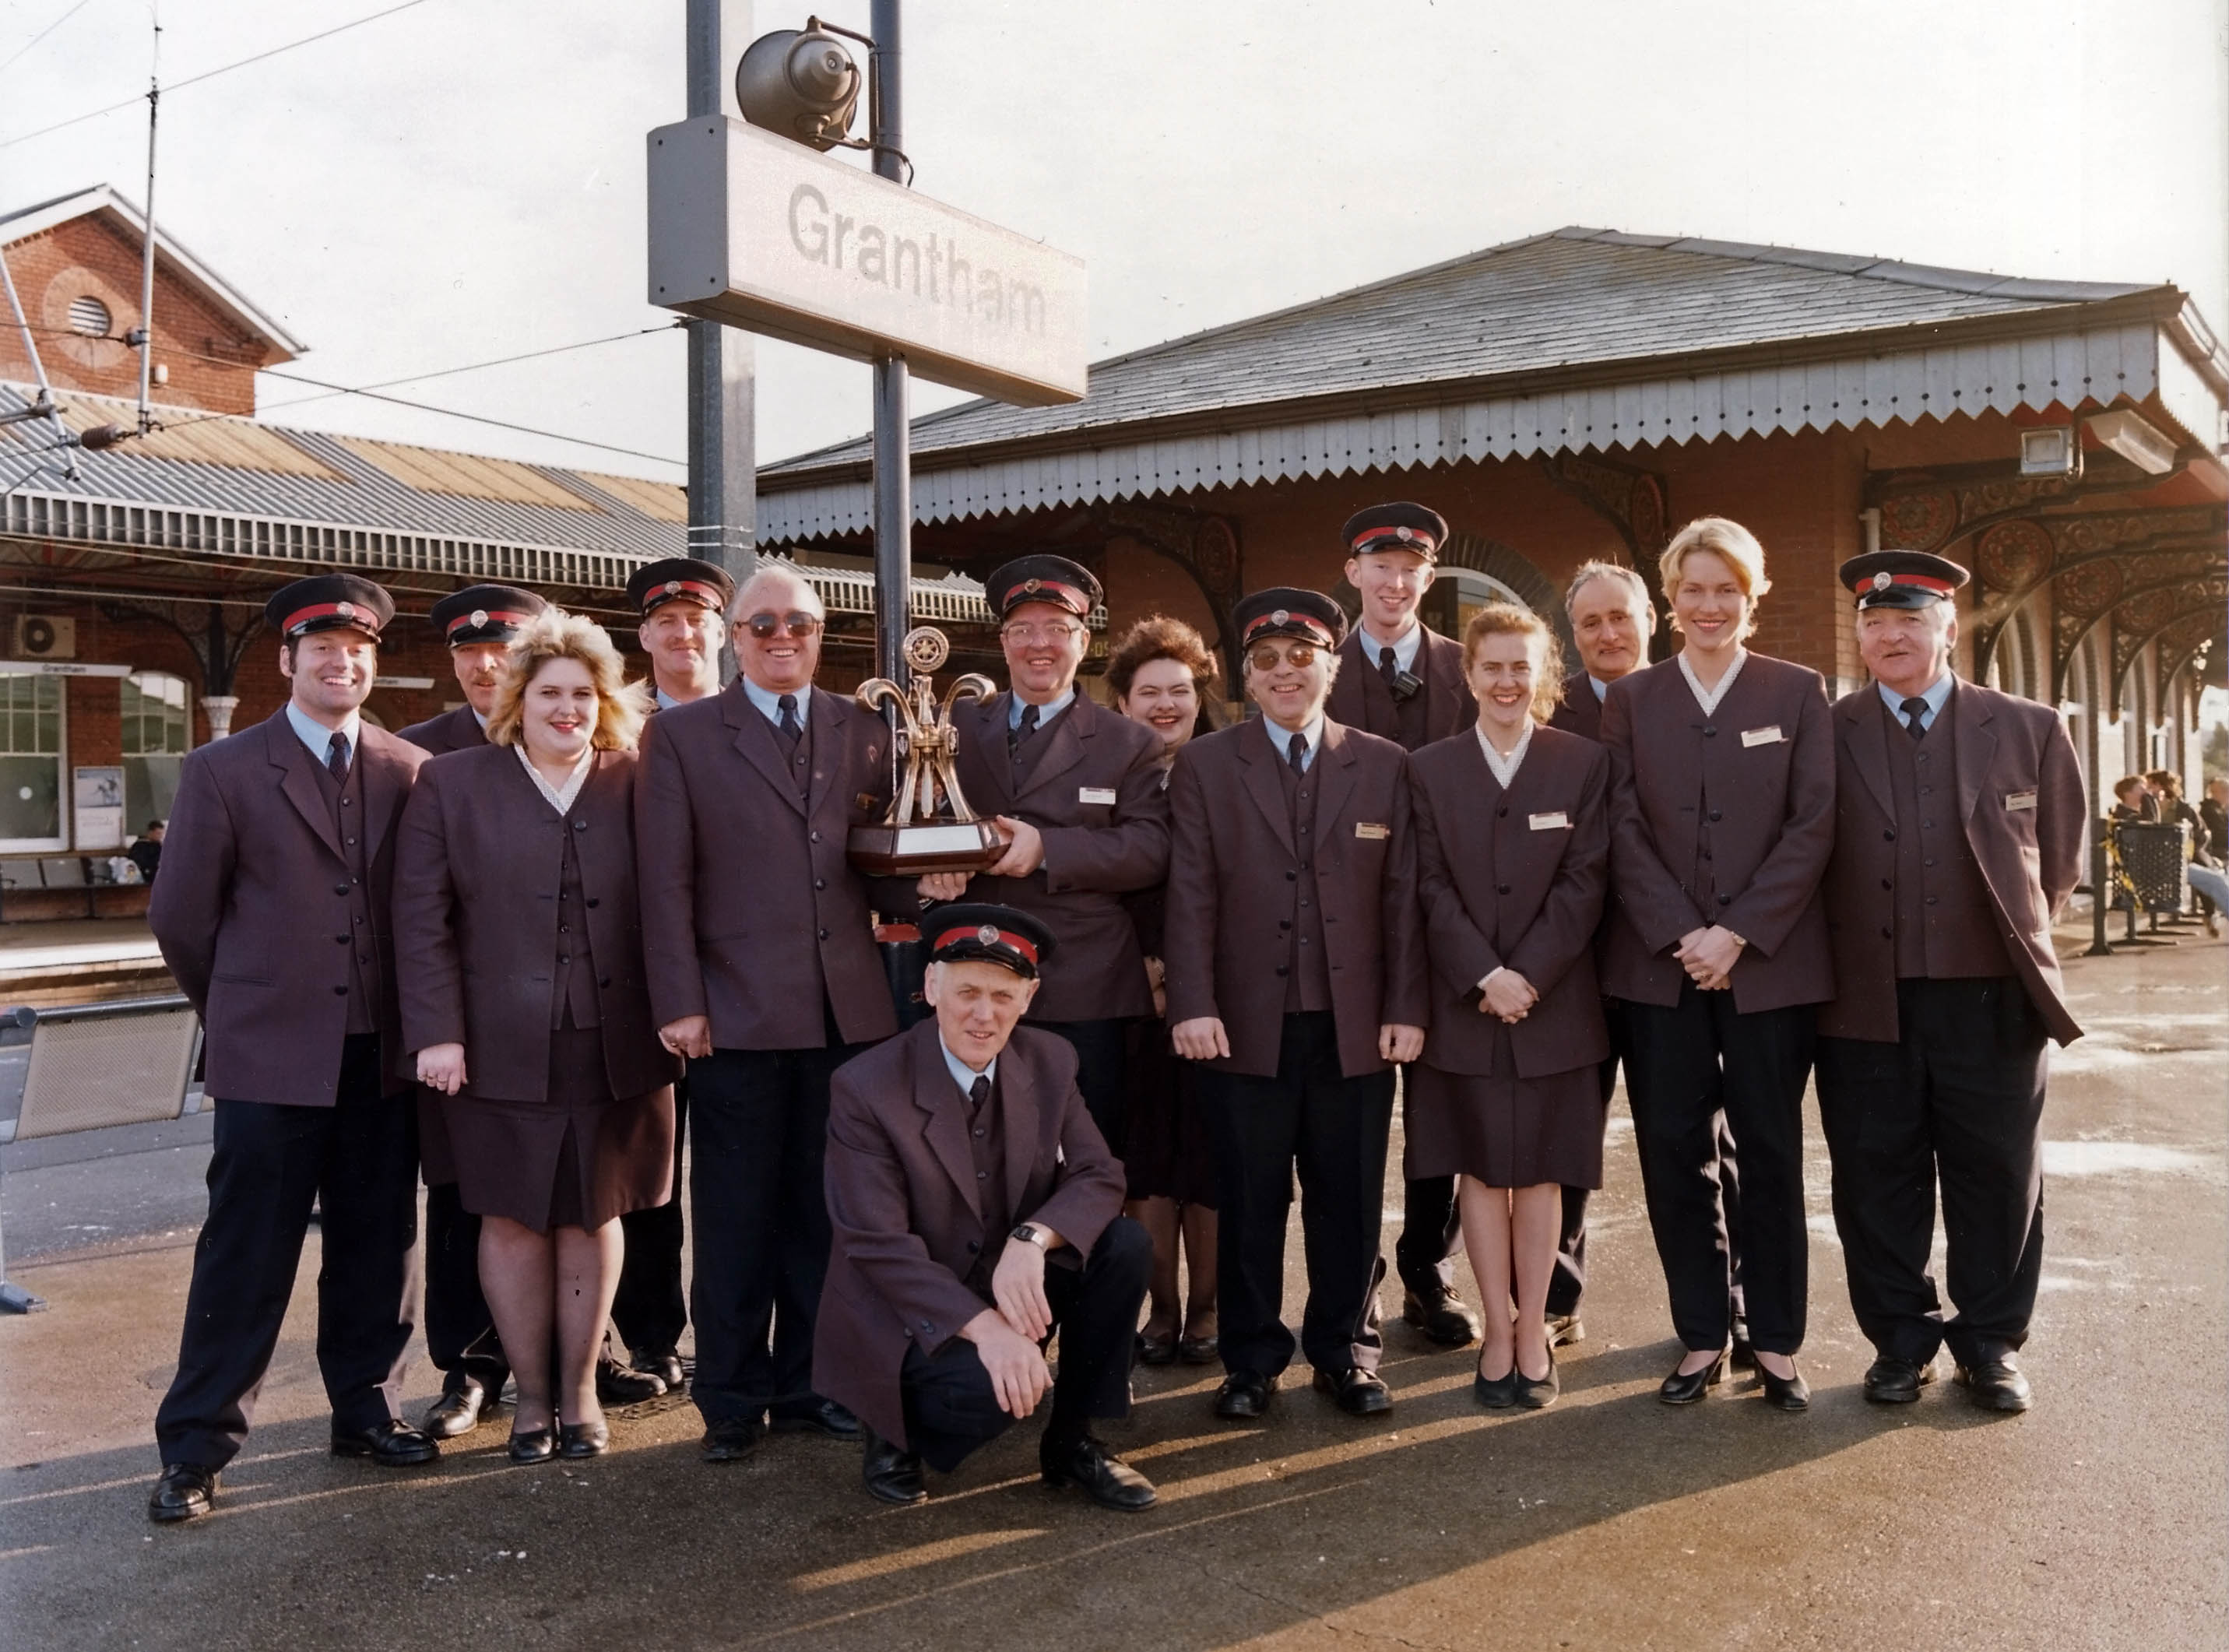 Station Staff in October 1998 with the Station of the Year trophy. Back row: Phil Beck, Paul Simons, Sharon Feeley, David Fielding, Barry Booth (train crew roster clerk). Middle row: ...unknown, Emma Norris, Tom ..., John Starbuck, Roger Prior, Val Markham, Caroline ..., Mick Gibson. In front: Derrick Pegg. Photograph by Fastline Photographic, kindly lent by John Starbuck.